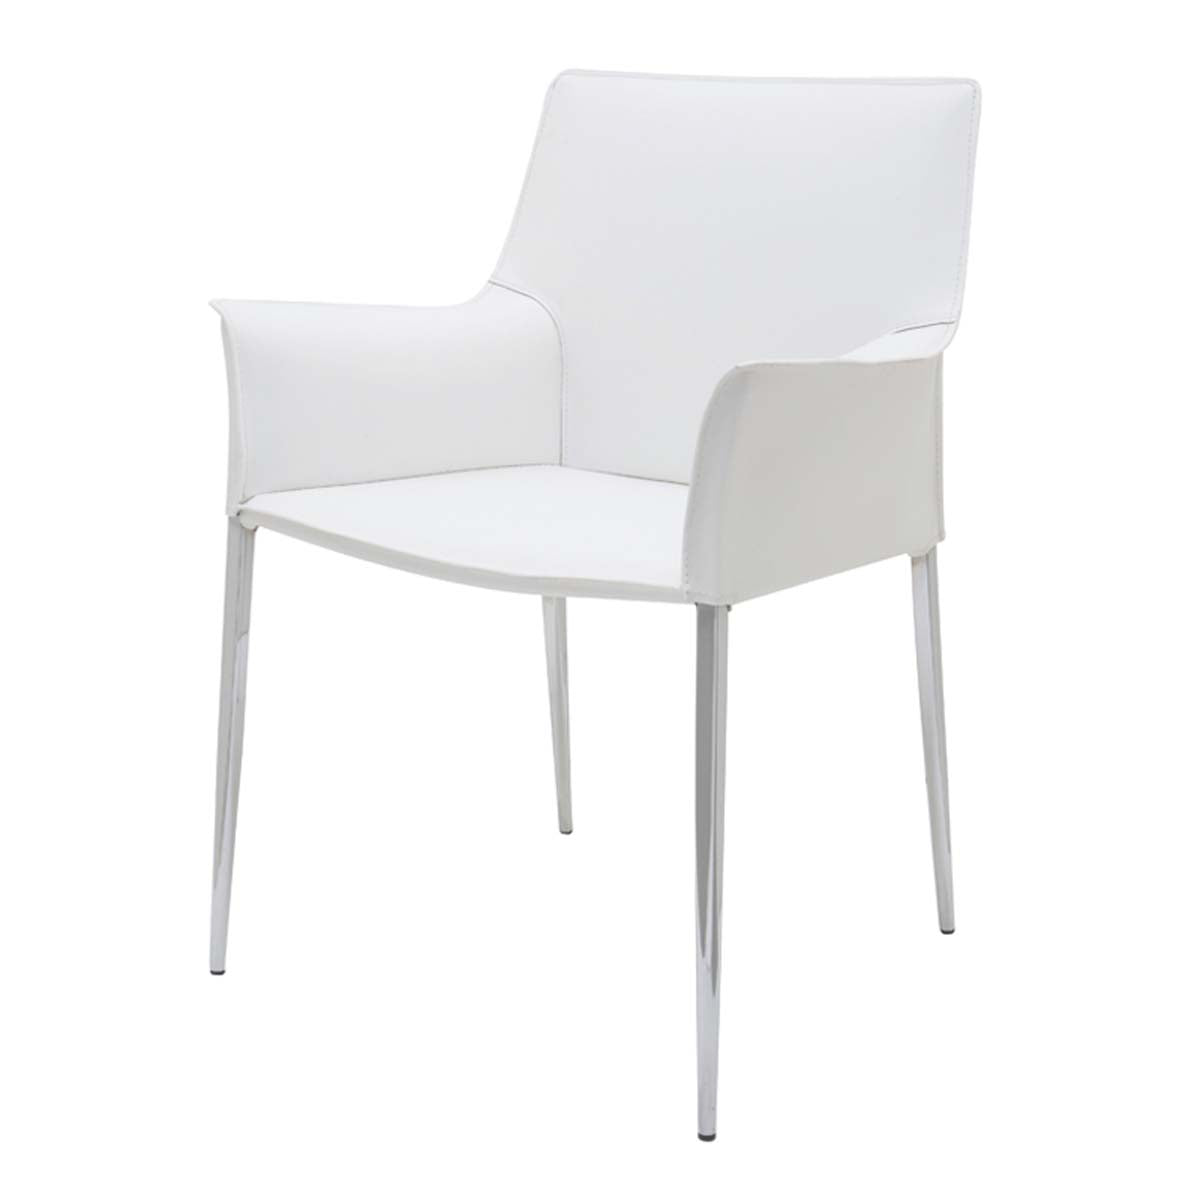 Nuevo Colter Leather/Chrome Dining Chair - White